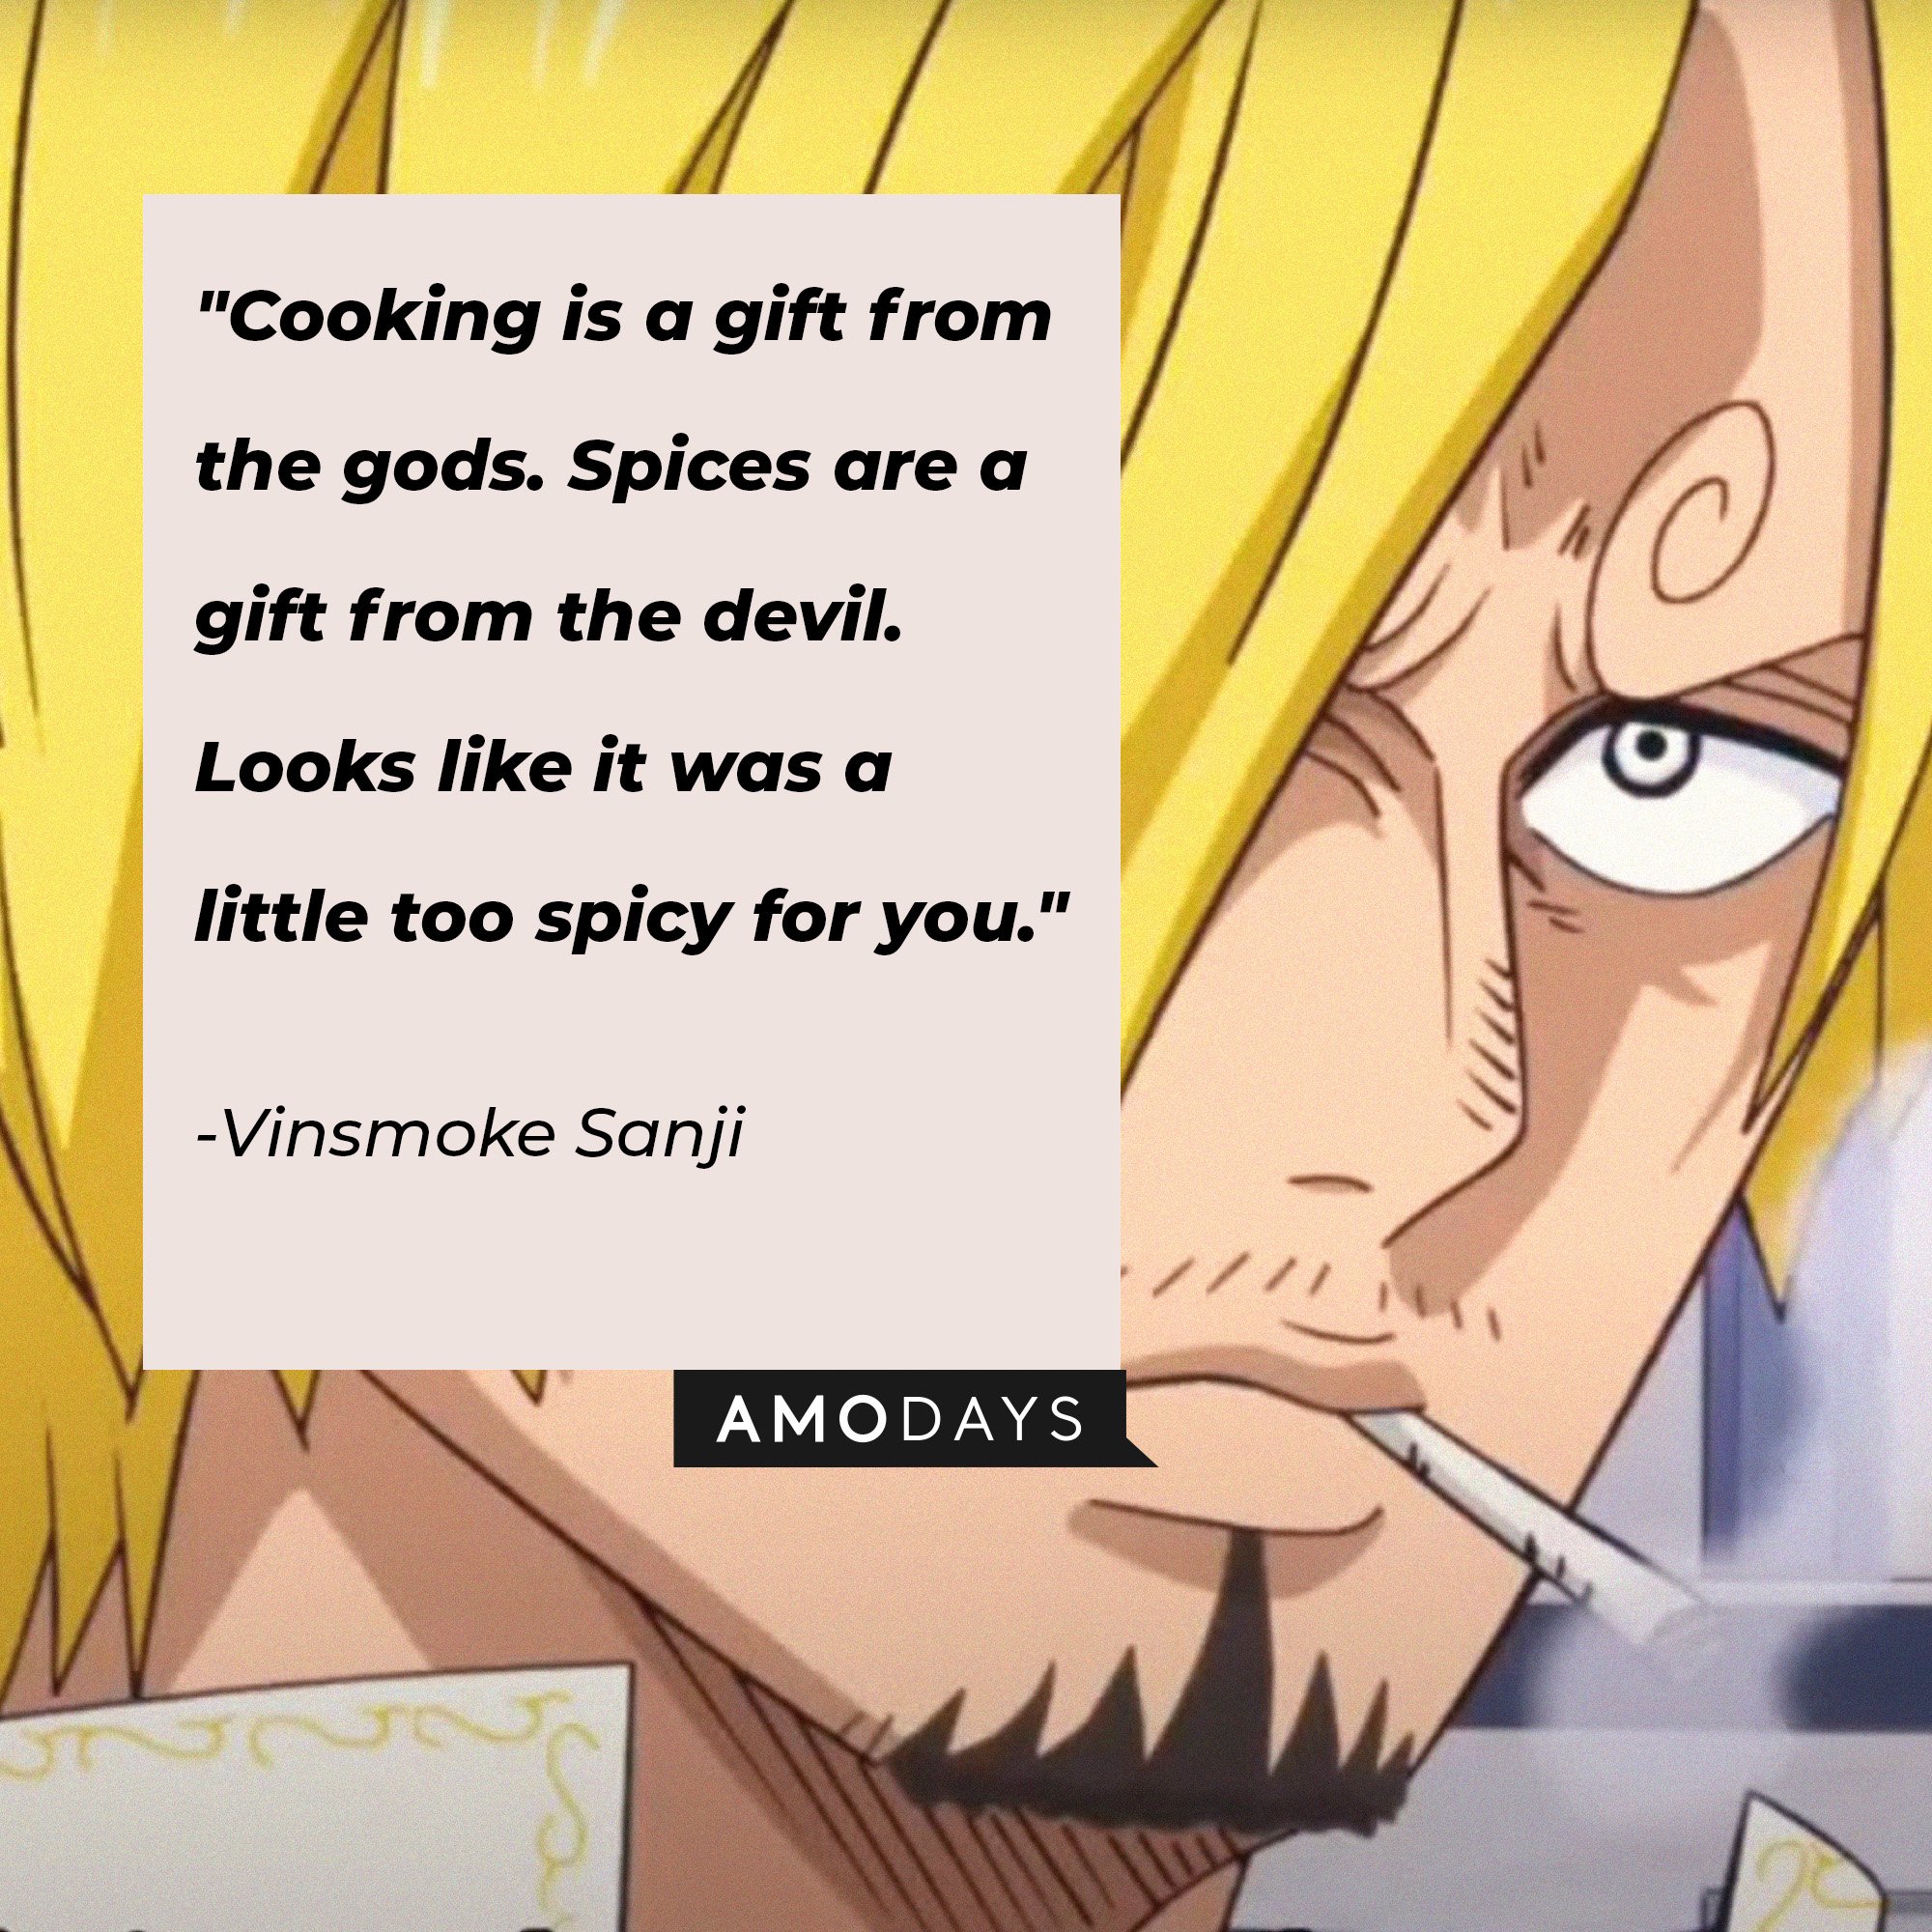  Vinsmoke Sanji's quote: "Cooking is a gift from the gods. Spices are a gift from the devil.  Looks like it was a little too spicy for you." | Image: AmoDays